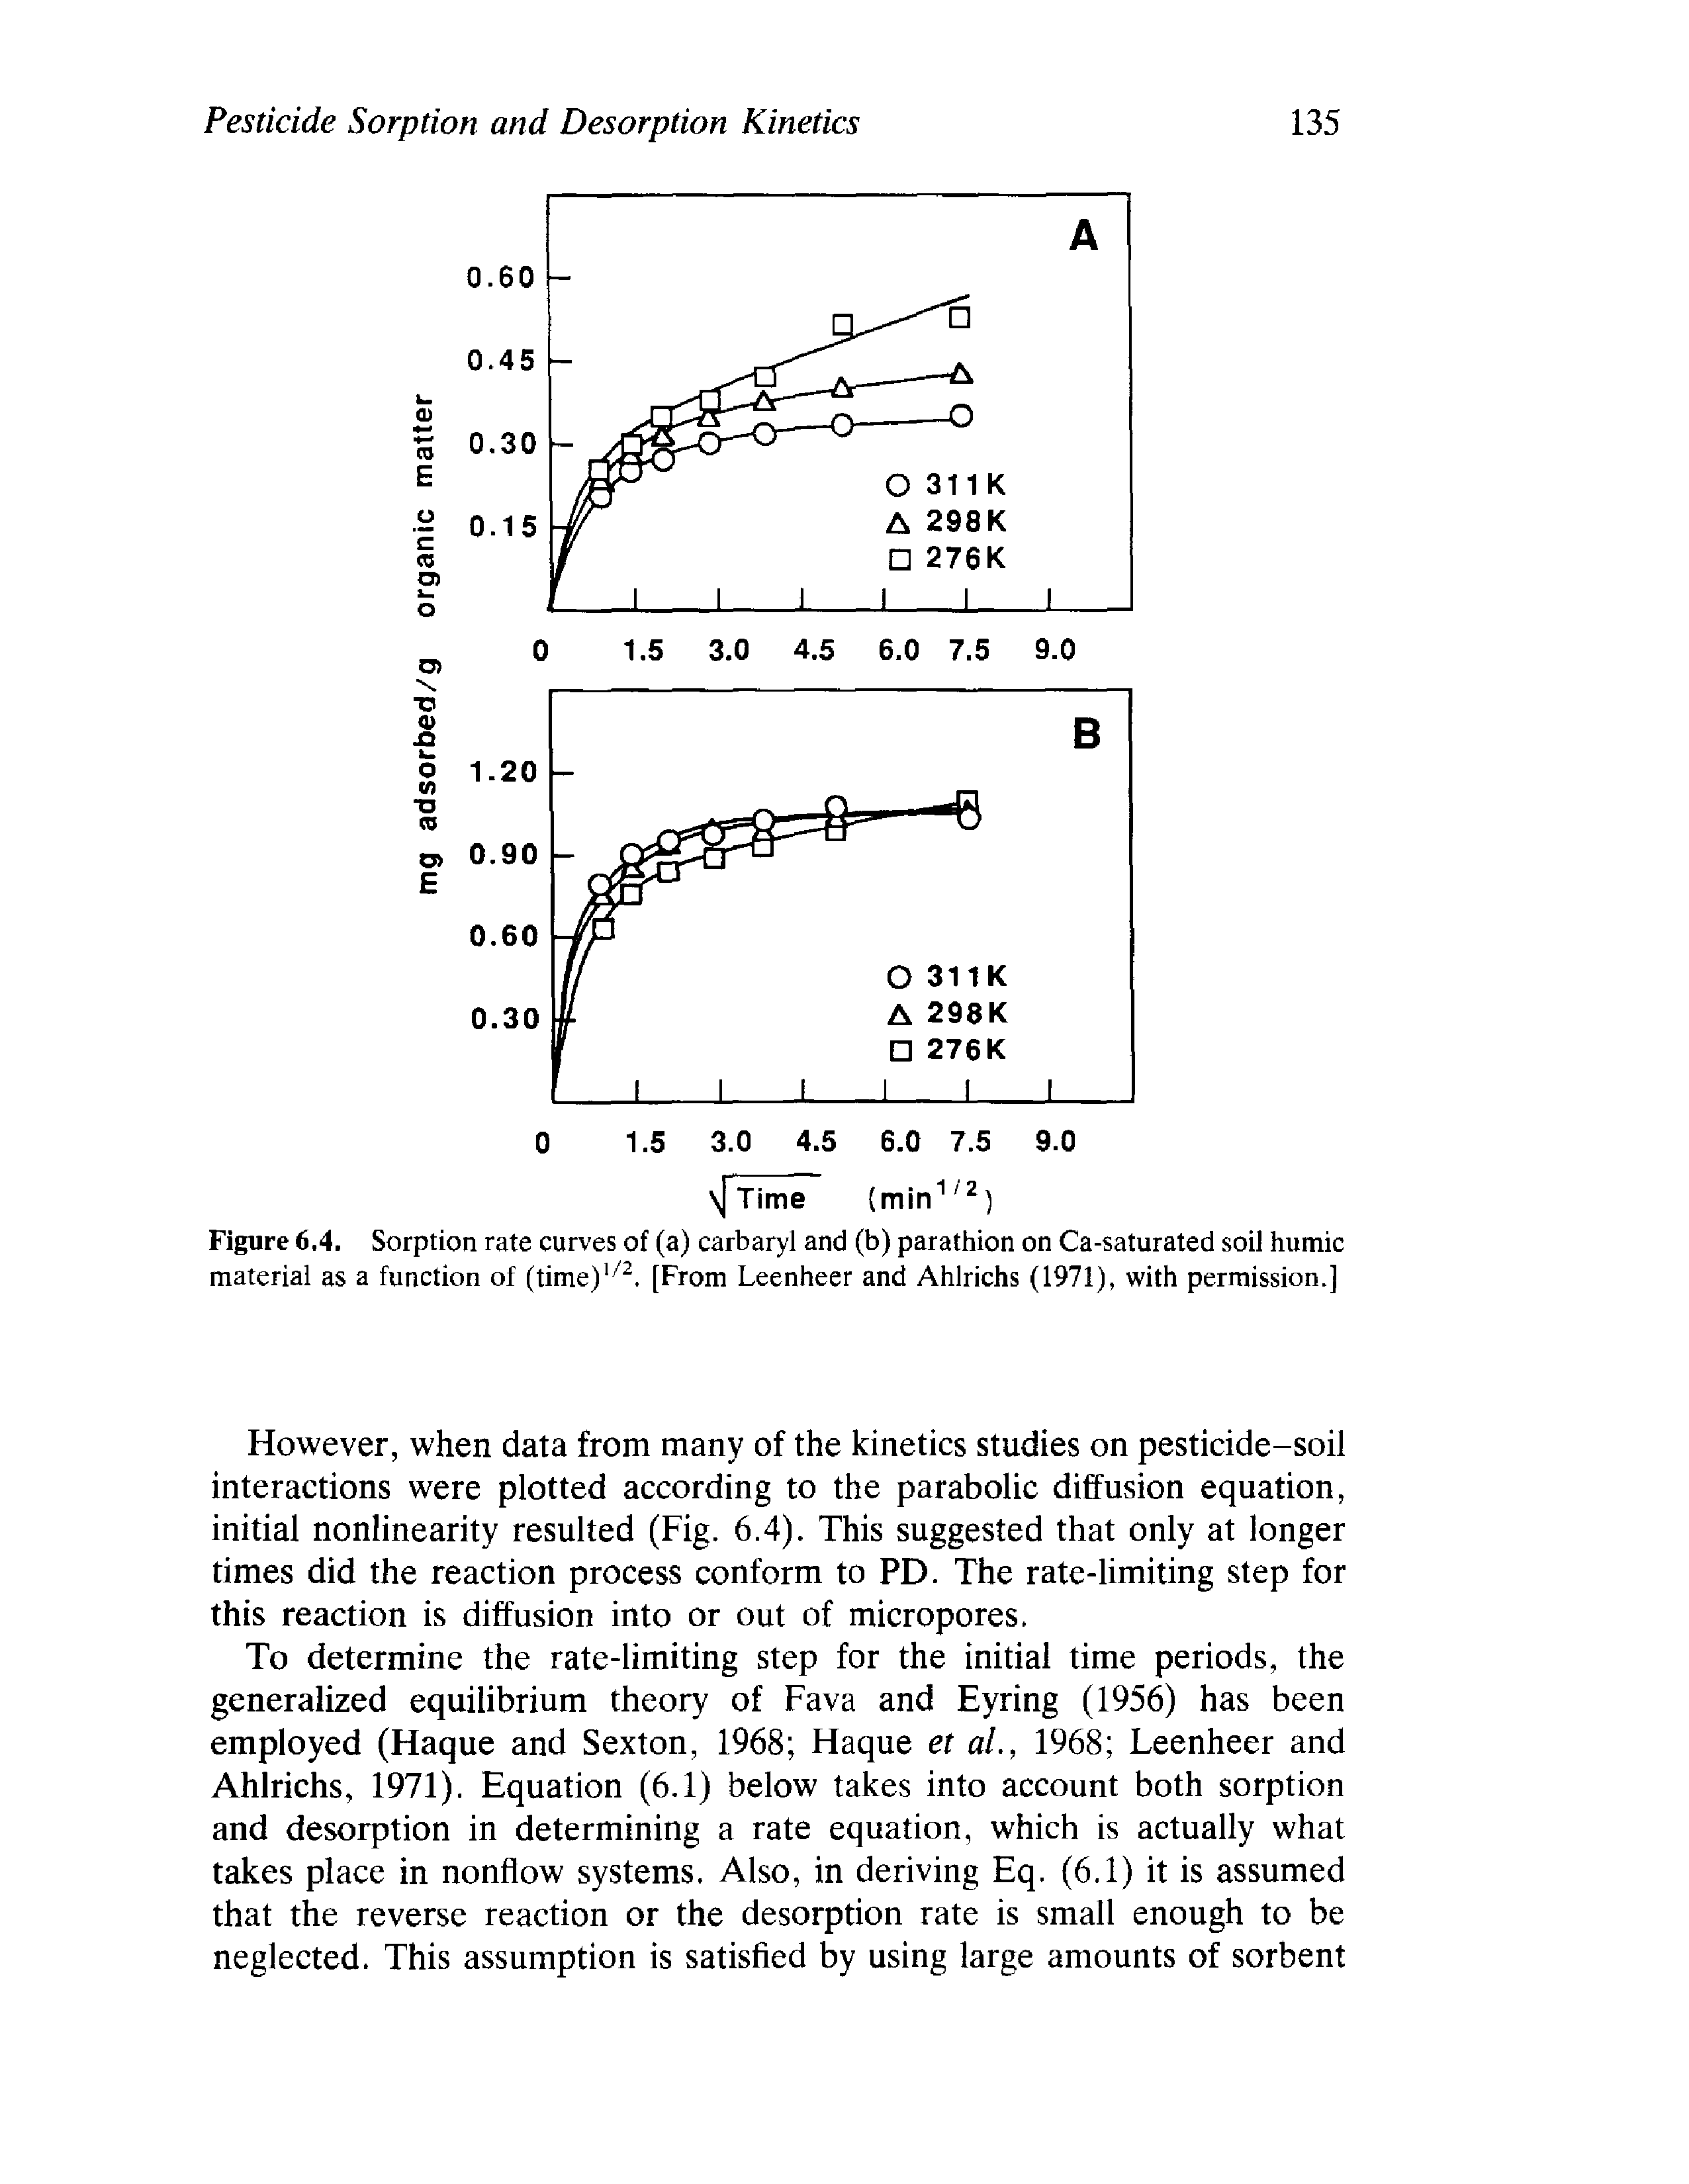 Figure 6.4. Sorption rate curves of (a) carbaryl and (b) parathion on Ca-saturated soil humic material as a function of (time)1/2. [From Leenheer and Ahlrichs (1971), with permission.]...